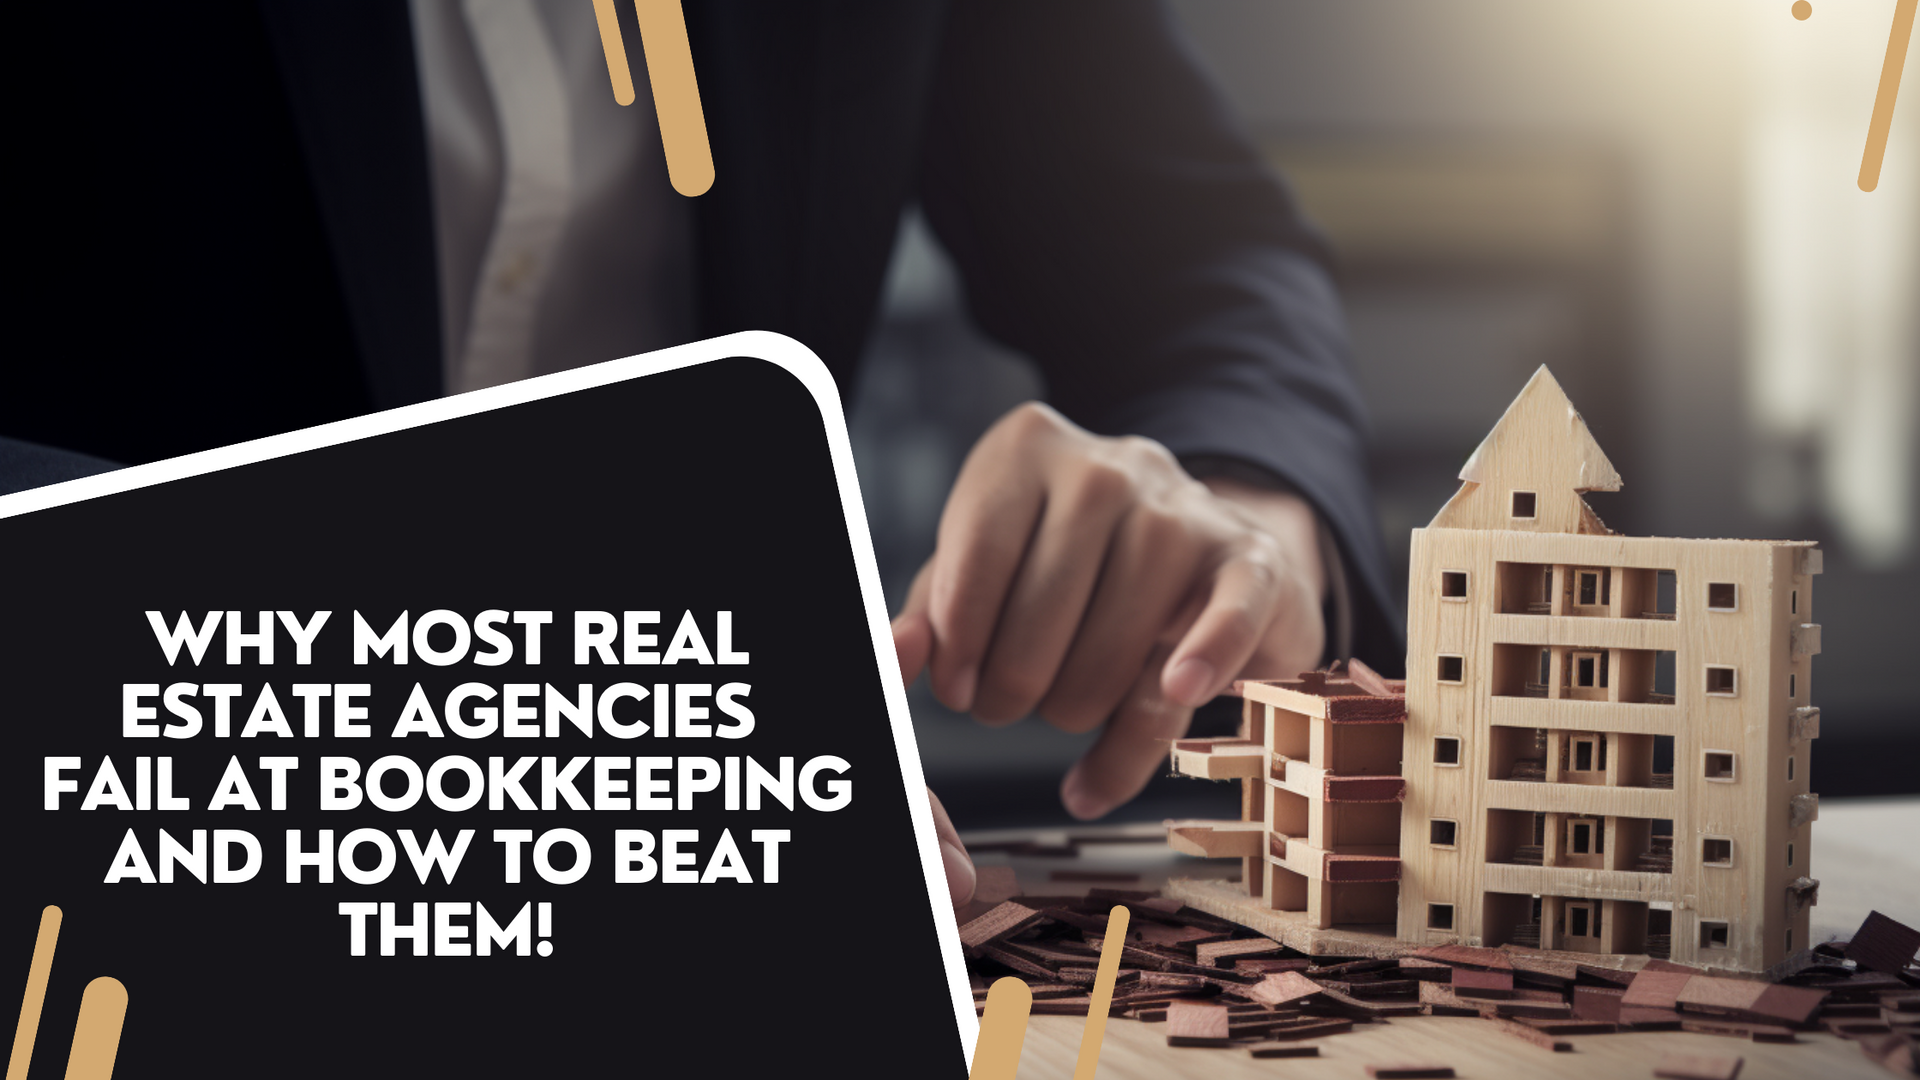 Why-Most-Real-Estate-Agencies-Fail-at-Bookkeeping-and-How-to-Beat-Them!